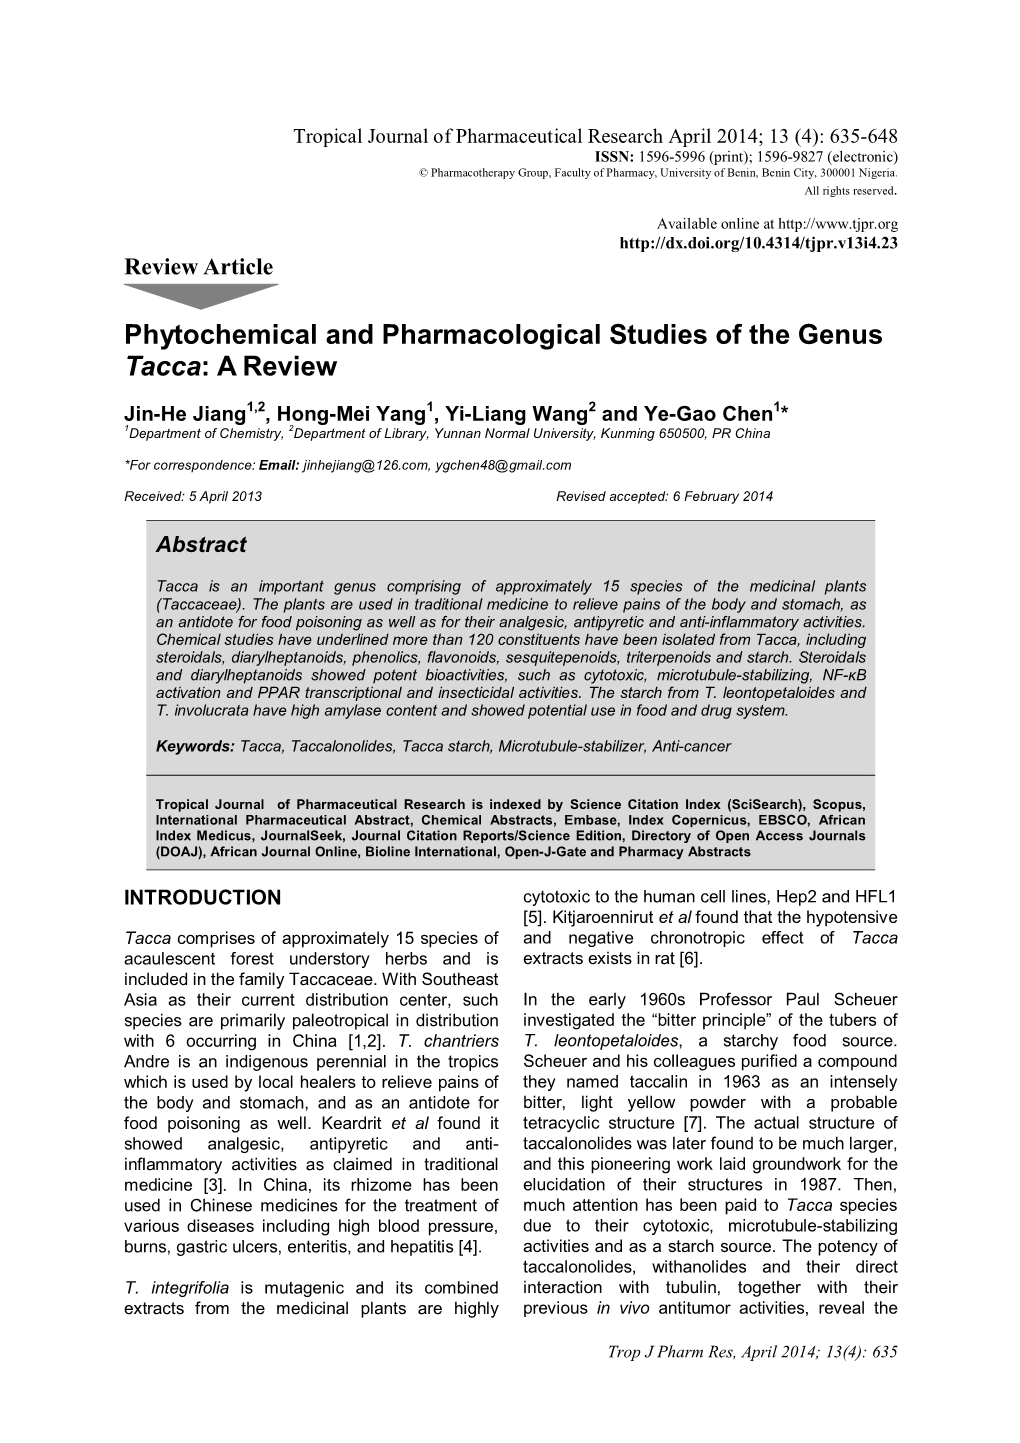 Phytochemical and Pharmacological Studies of the Genus Tacca: a Review